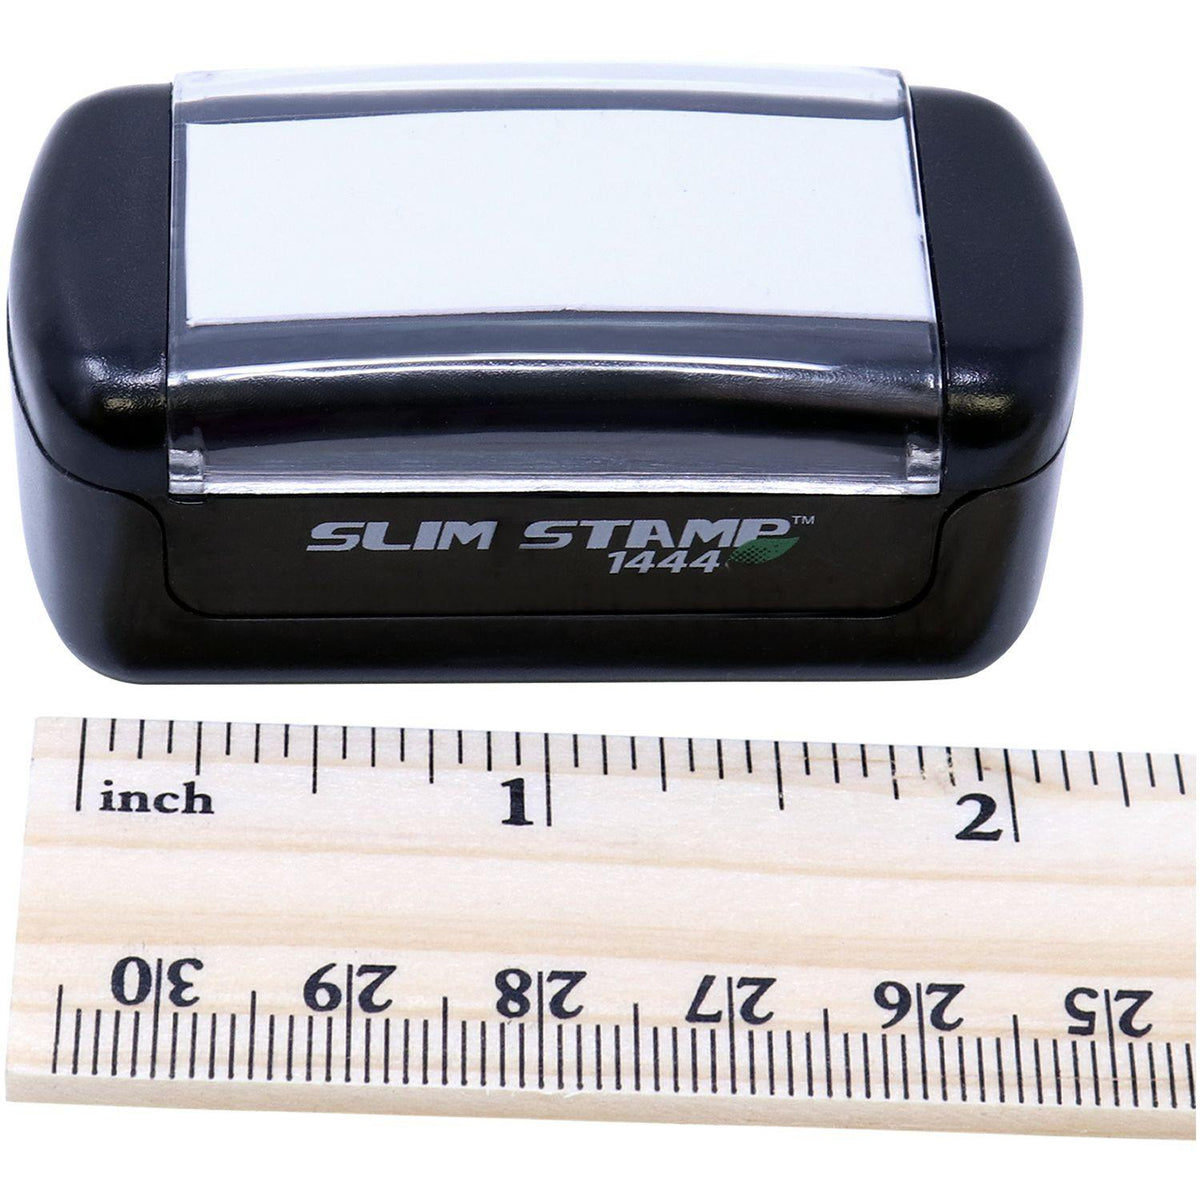 Measurement Slim Pre-Inked Economy Mail Stamp with Ruler